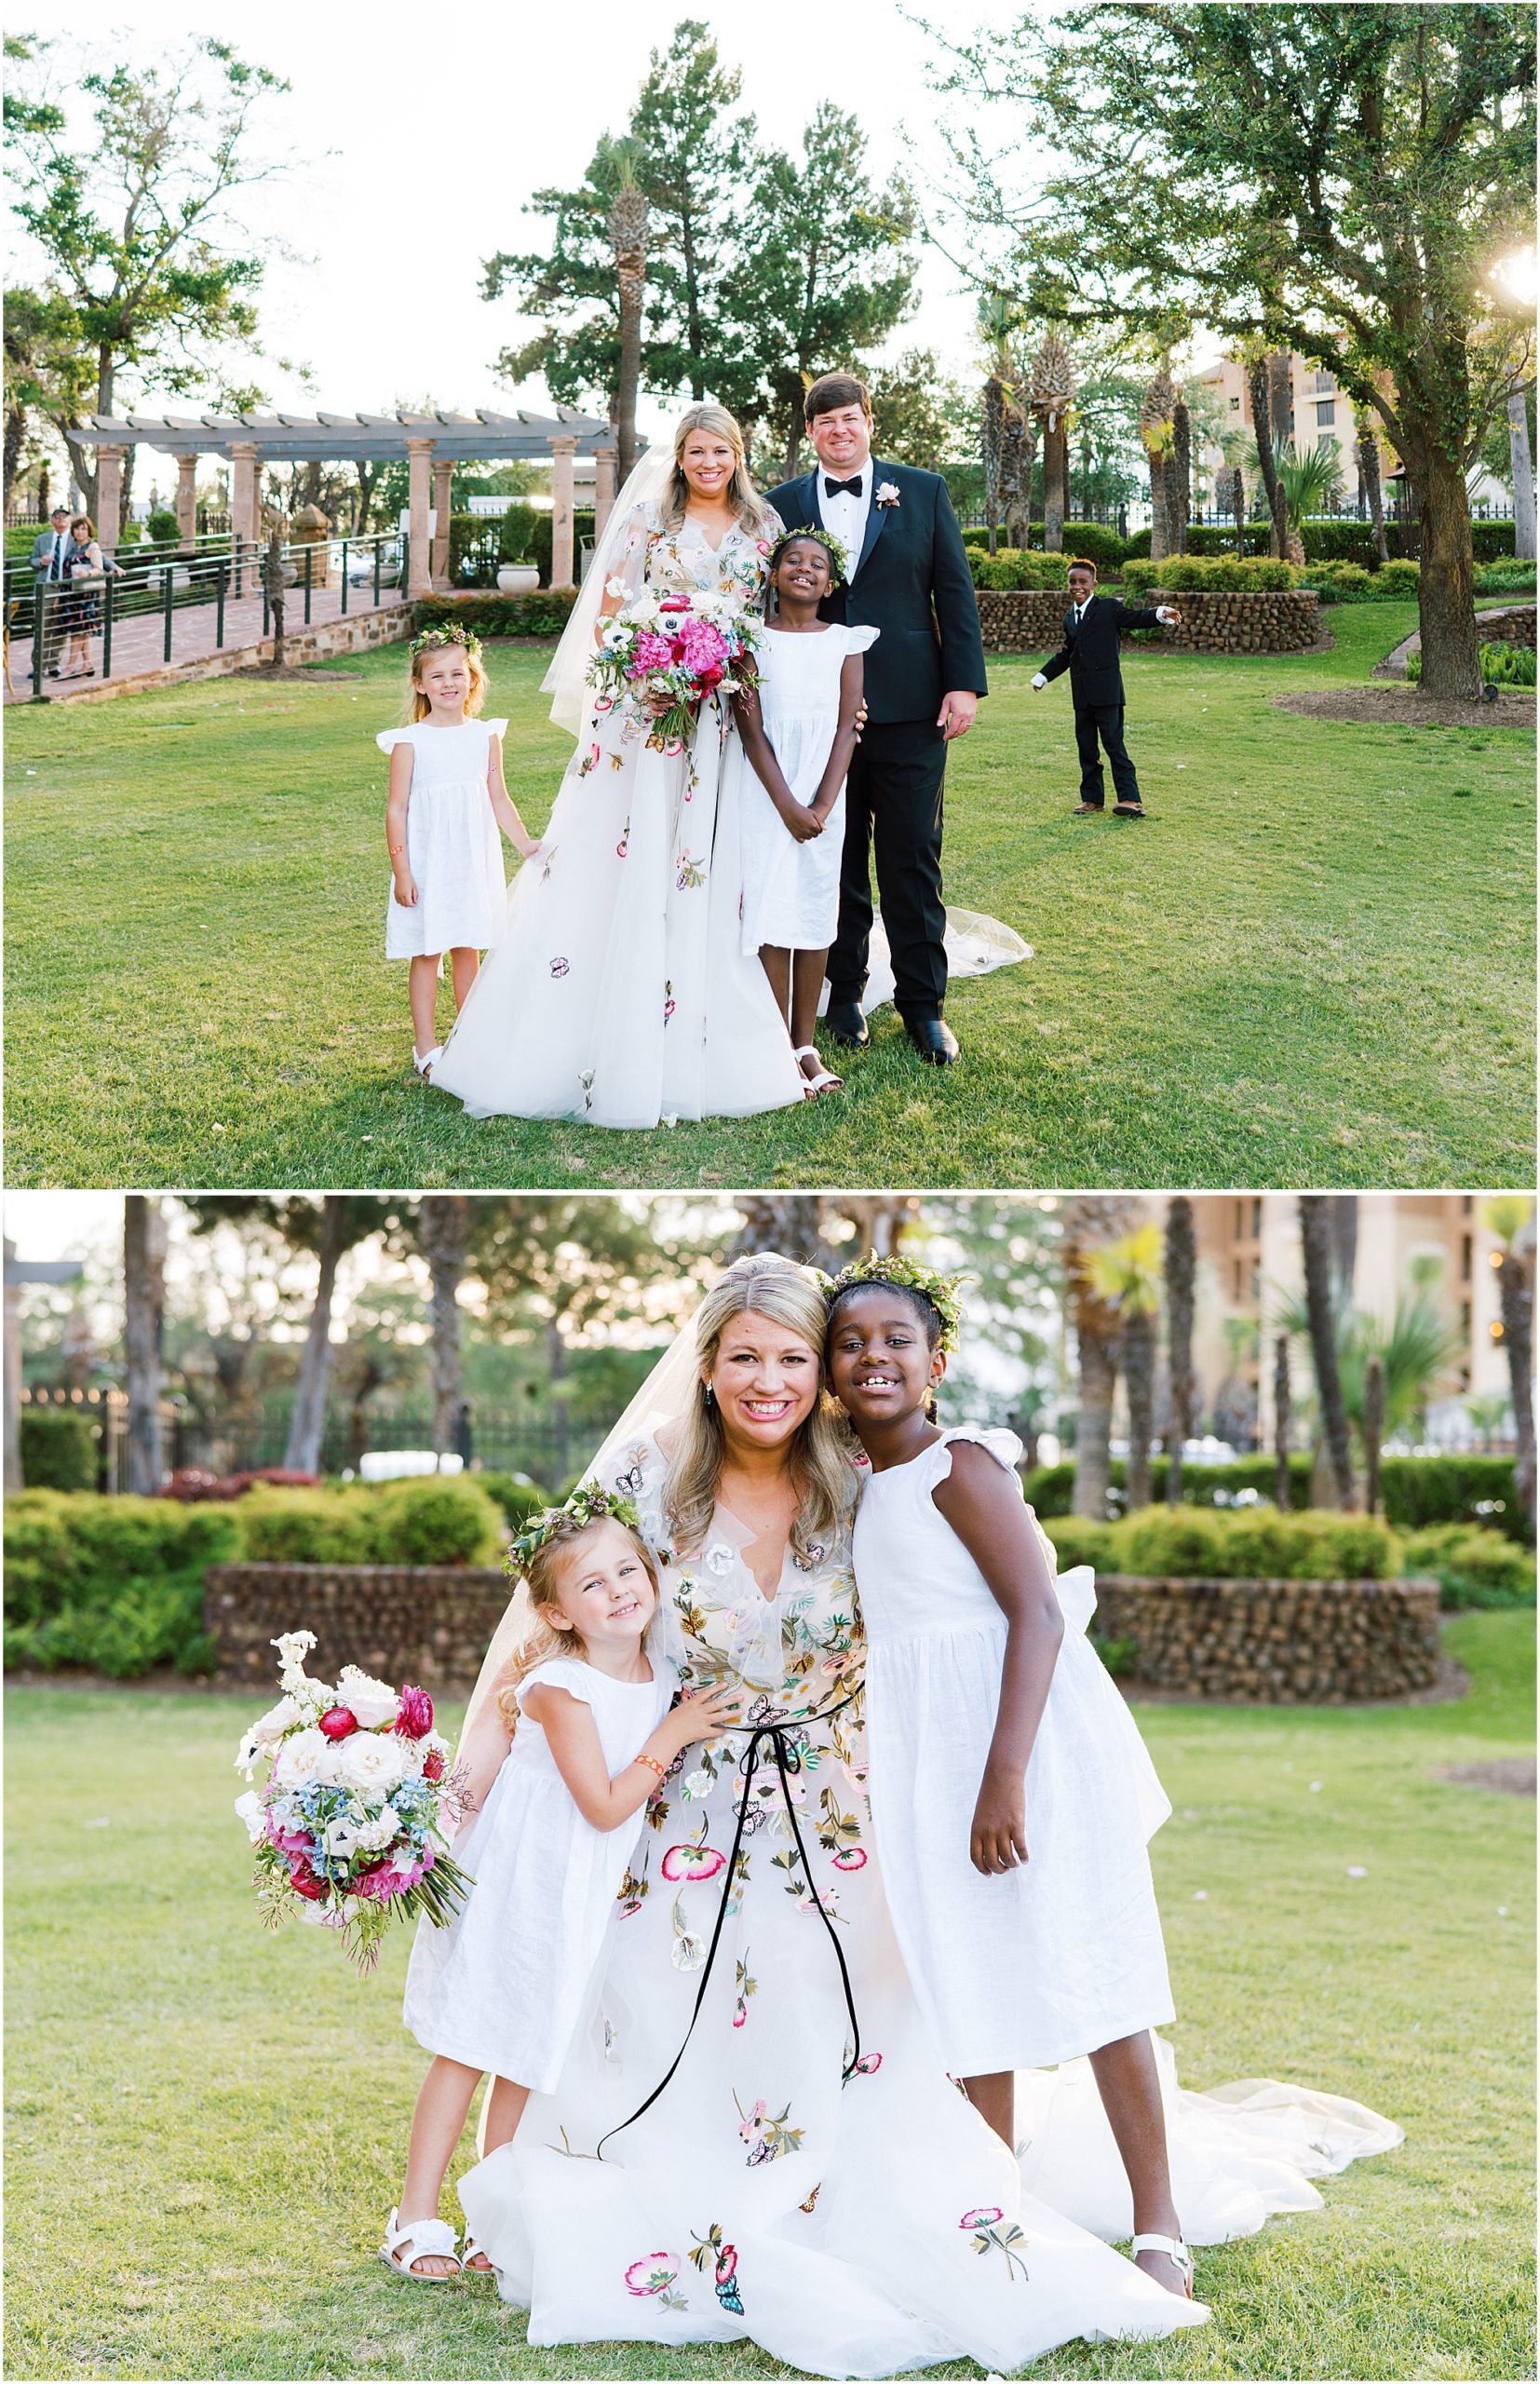 Bride in Monique Lhuillier with groom wearing a black tux with flower girls and ring bearer